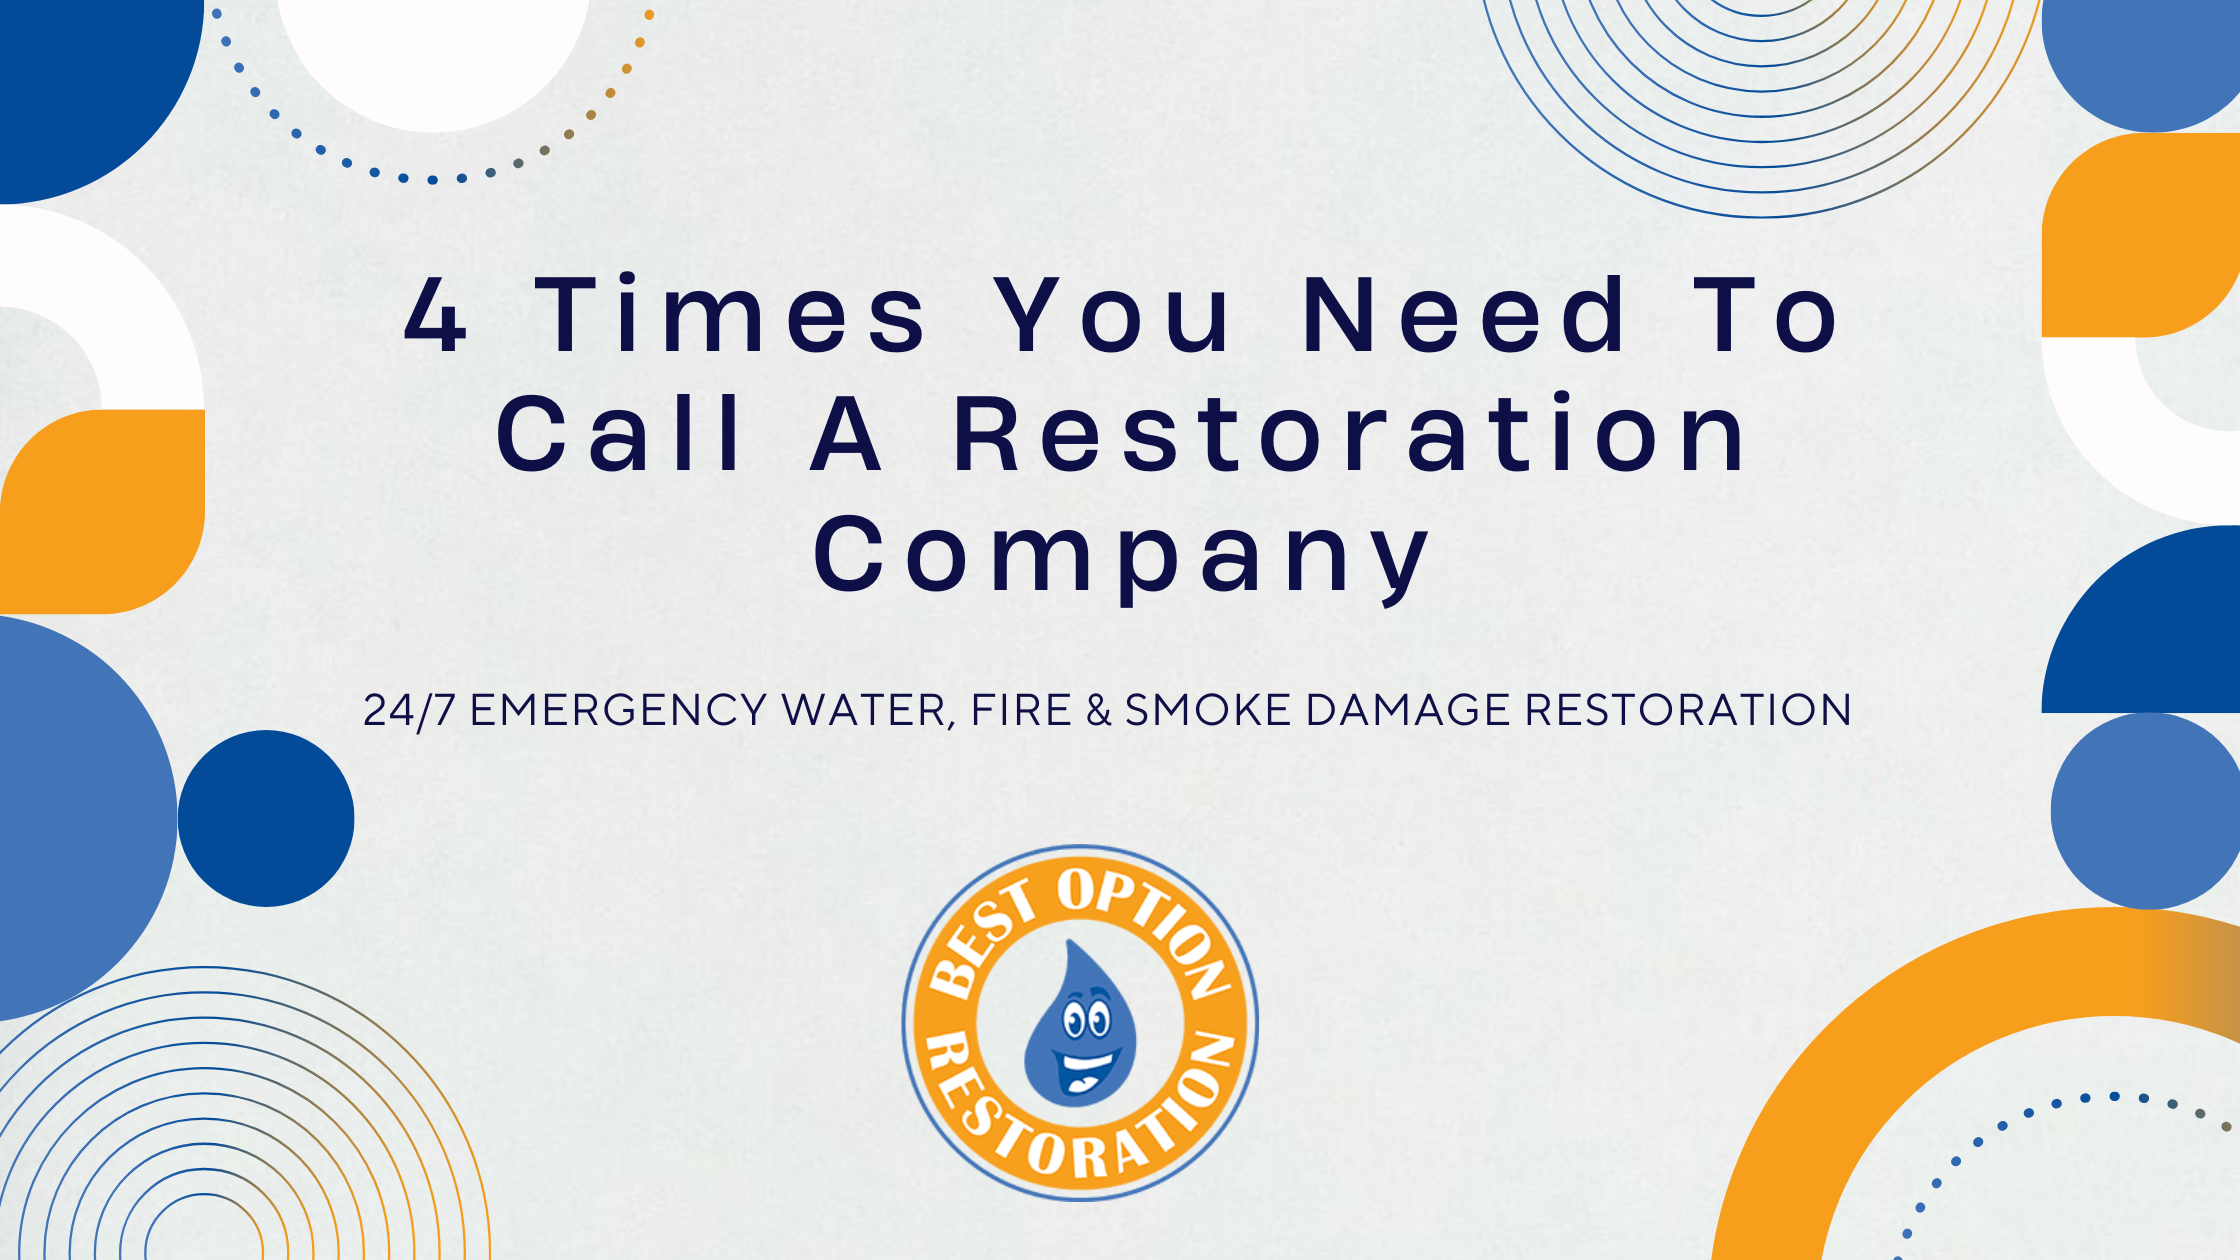 Emergency Response: 4 Key Times to Immediately Contact a Restoration Company